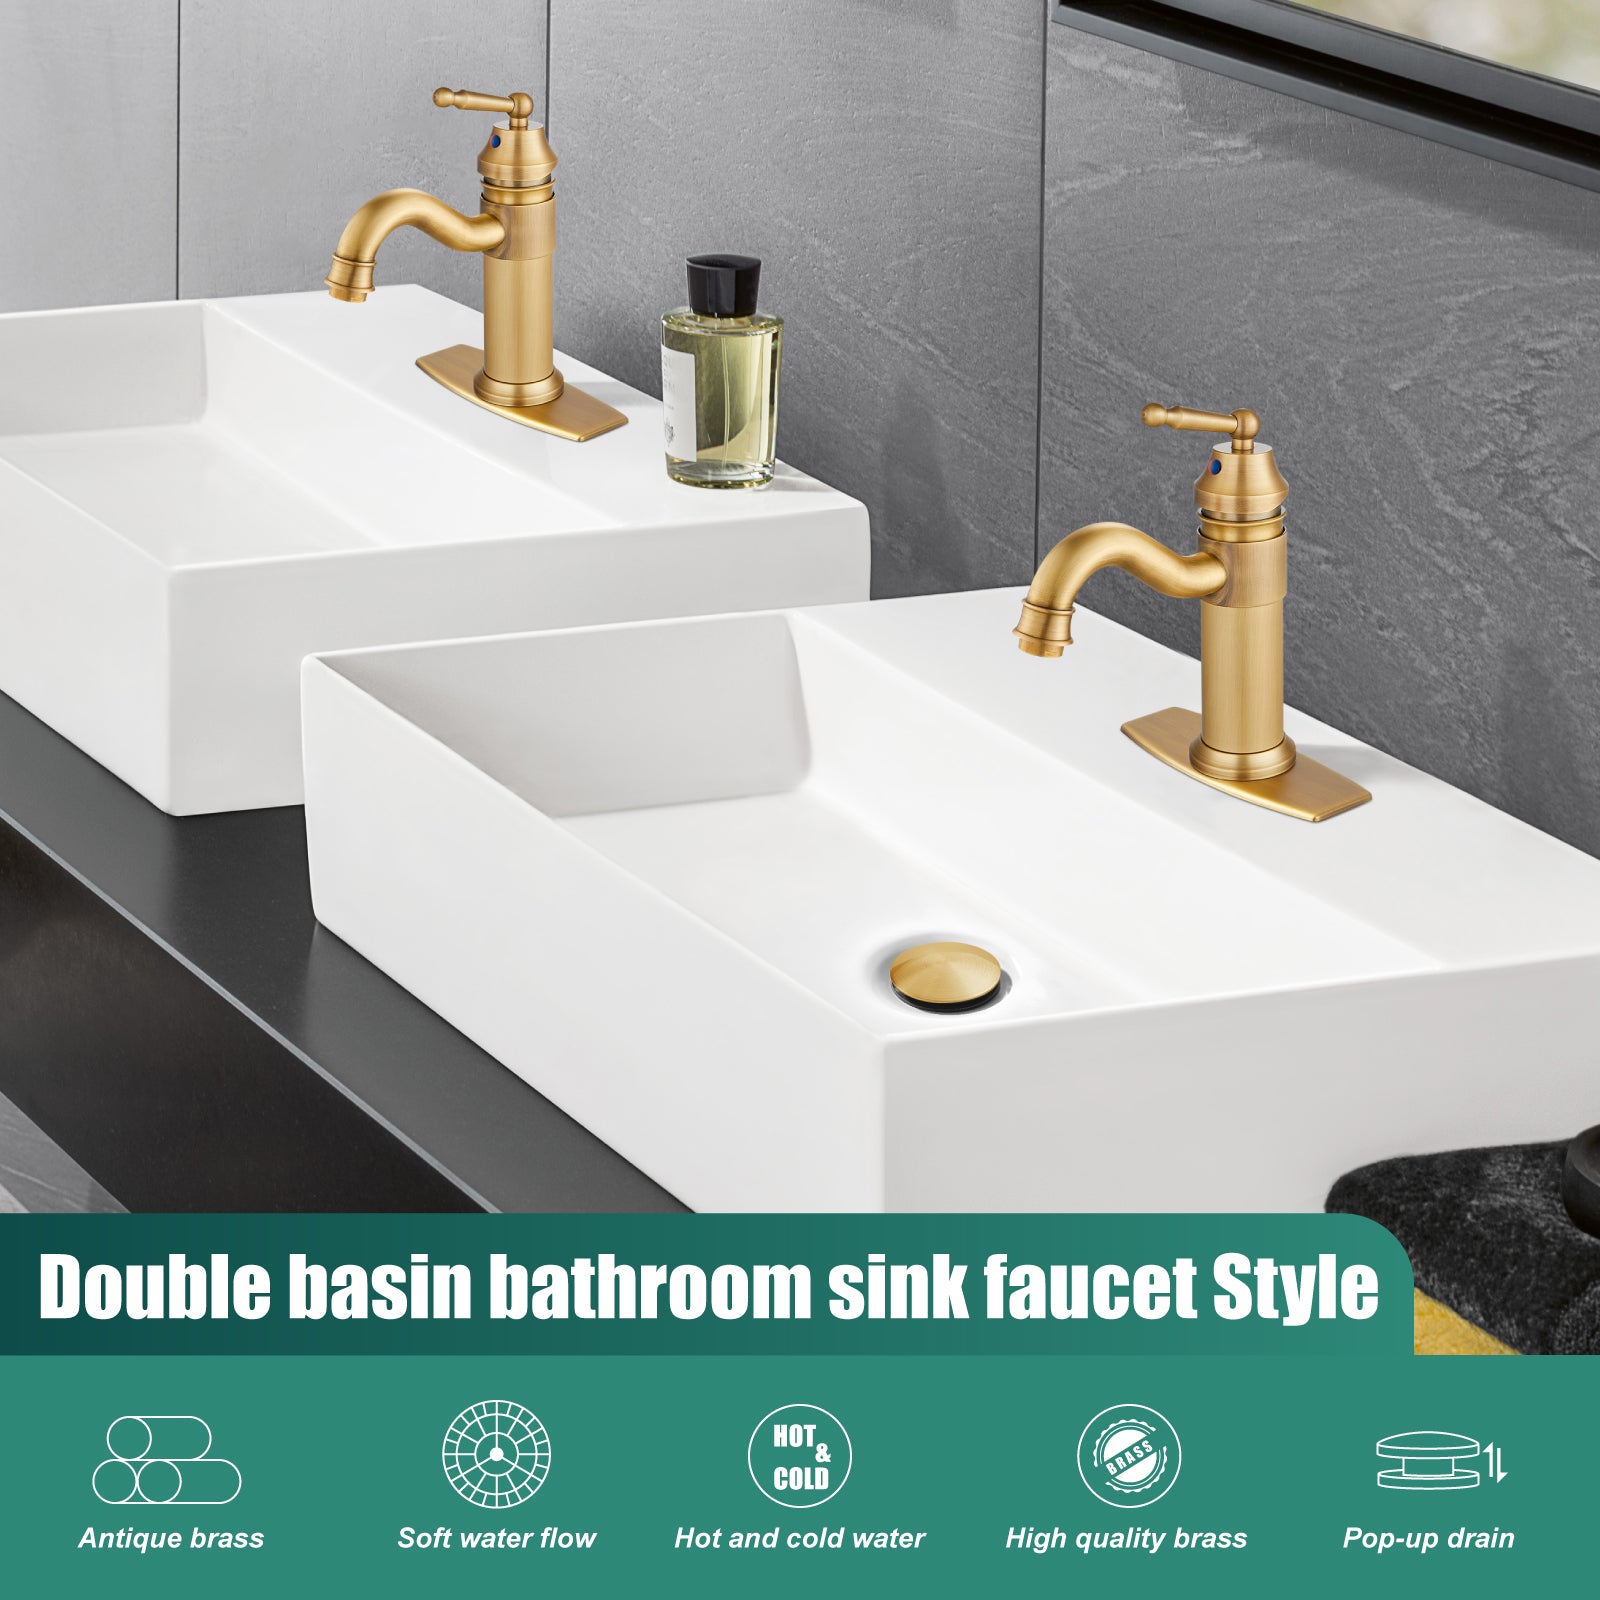 Heyalan Bathroom Sink Faucet Brass One Hole Single Handle Lavatory Fixture Deck Mounted Vanity Vessel Mixer Tap Pop Up Drain Included Hot and Cold Water